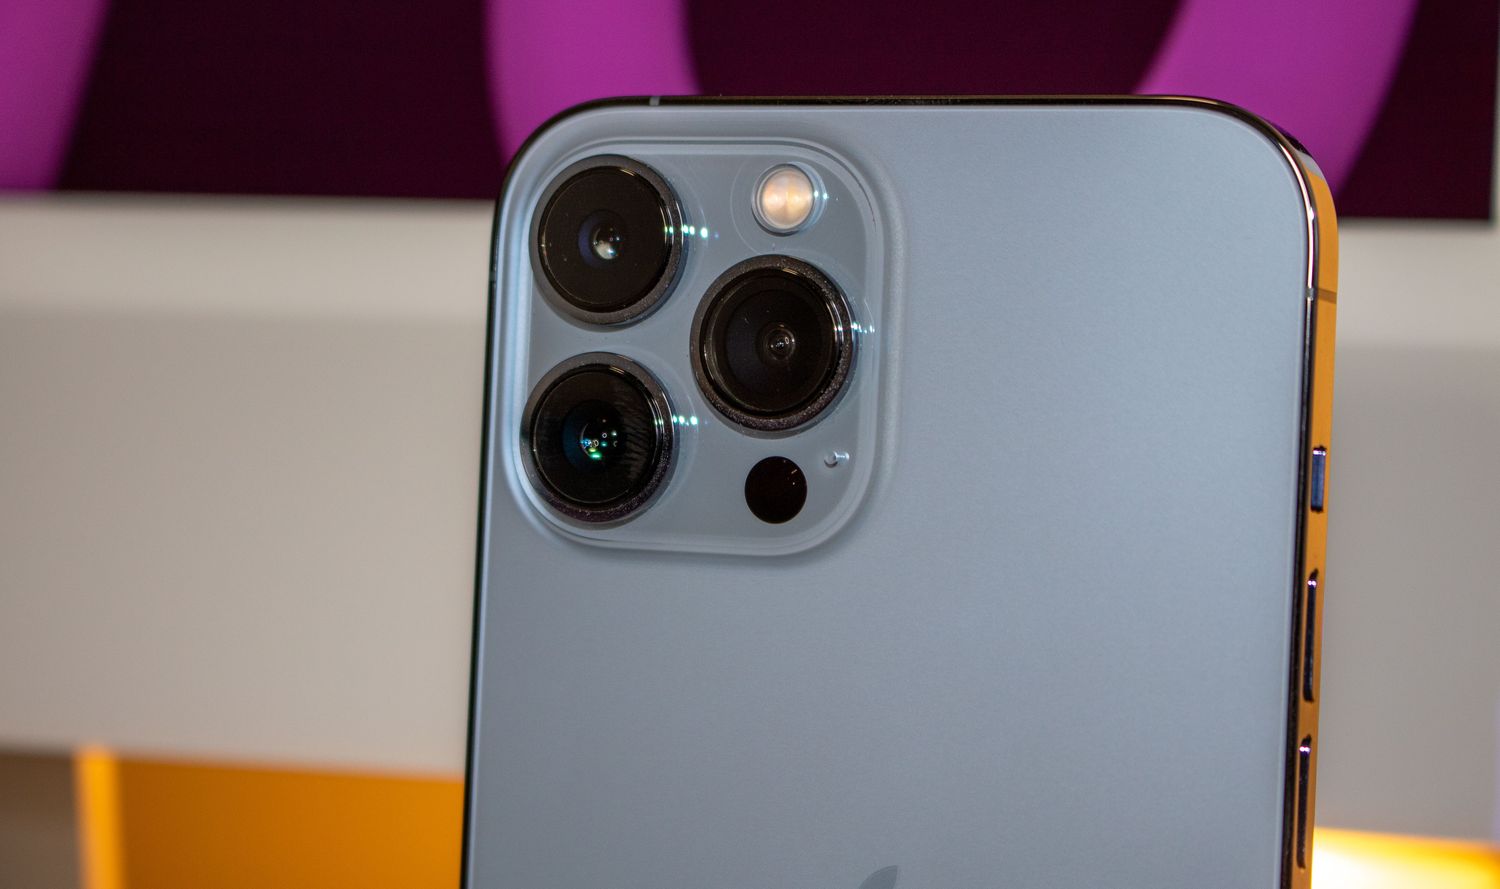 what-are-the-three-cameras-for-on-the-iphone-13-pro